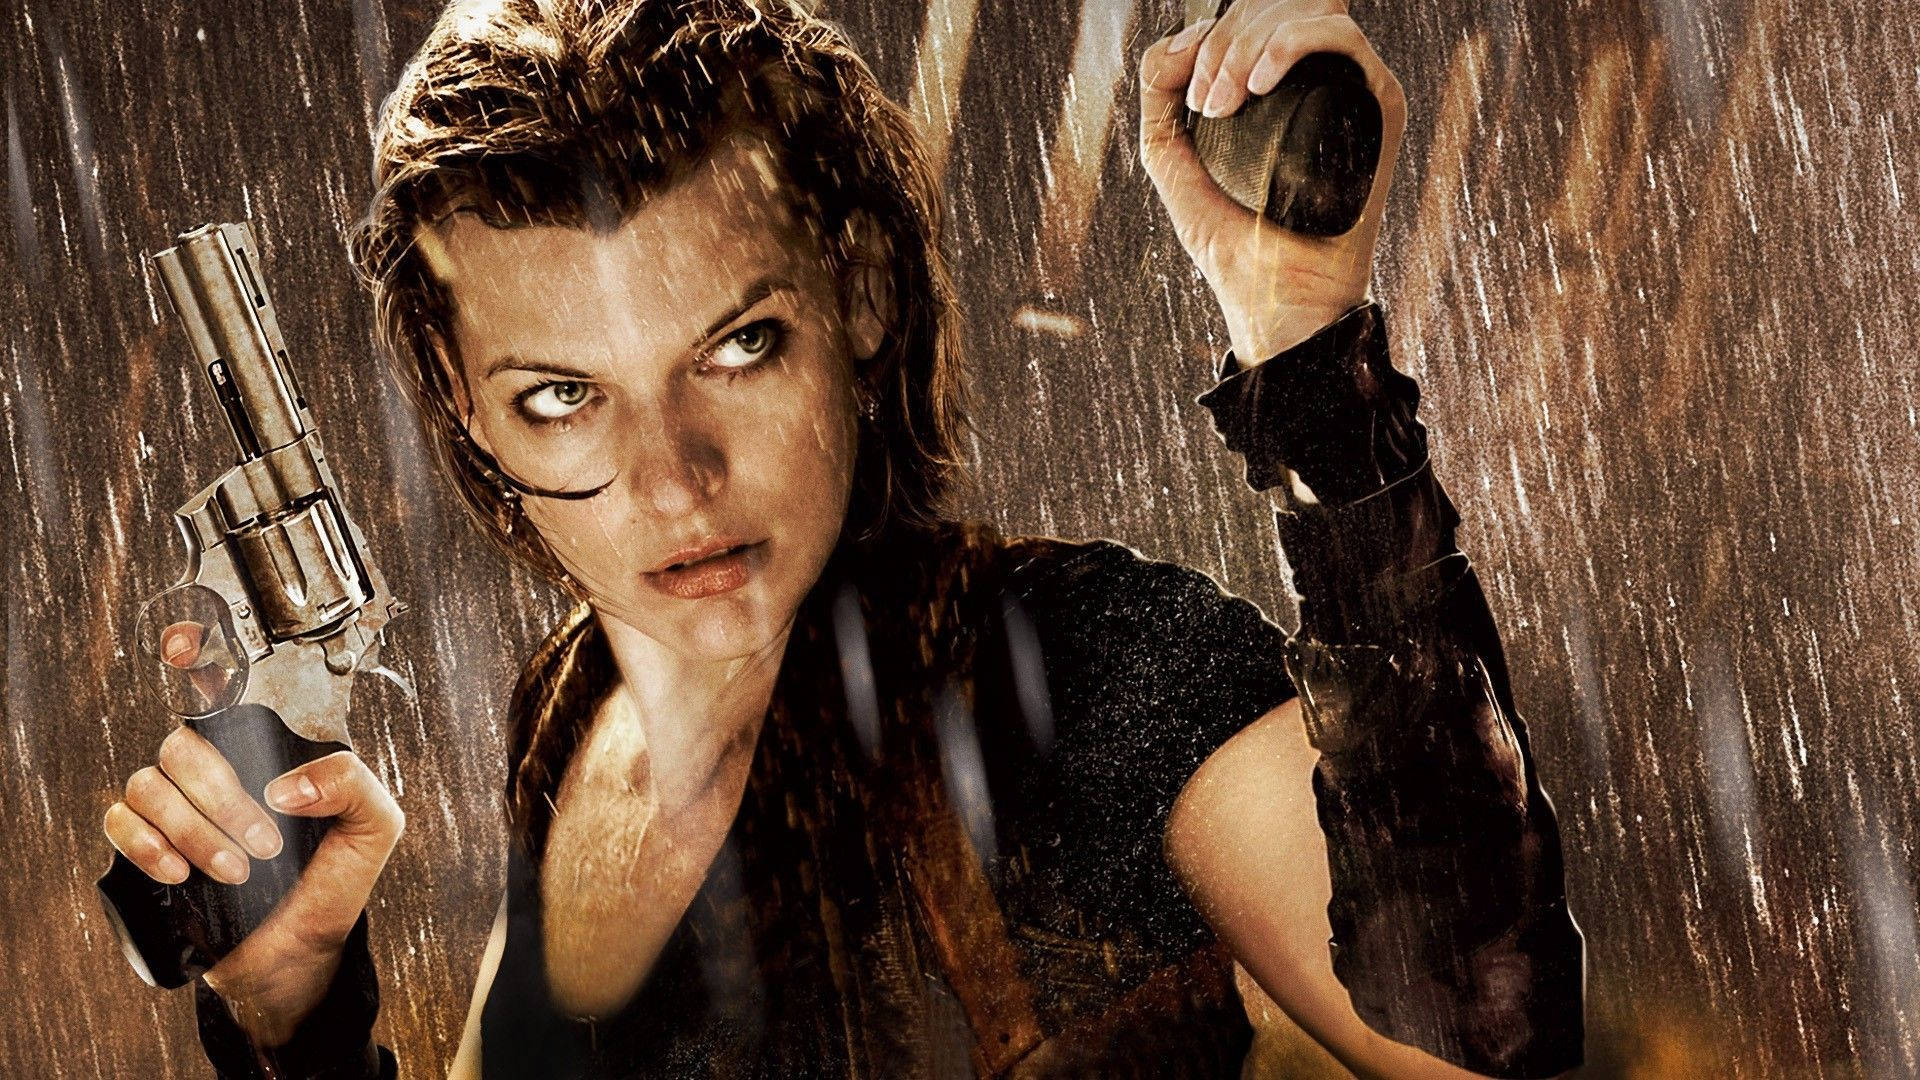 [100+] Milla Jovovich Pictures | page 2 | Wallpapers.com